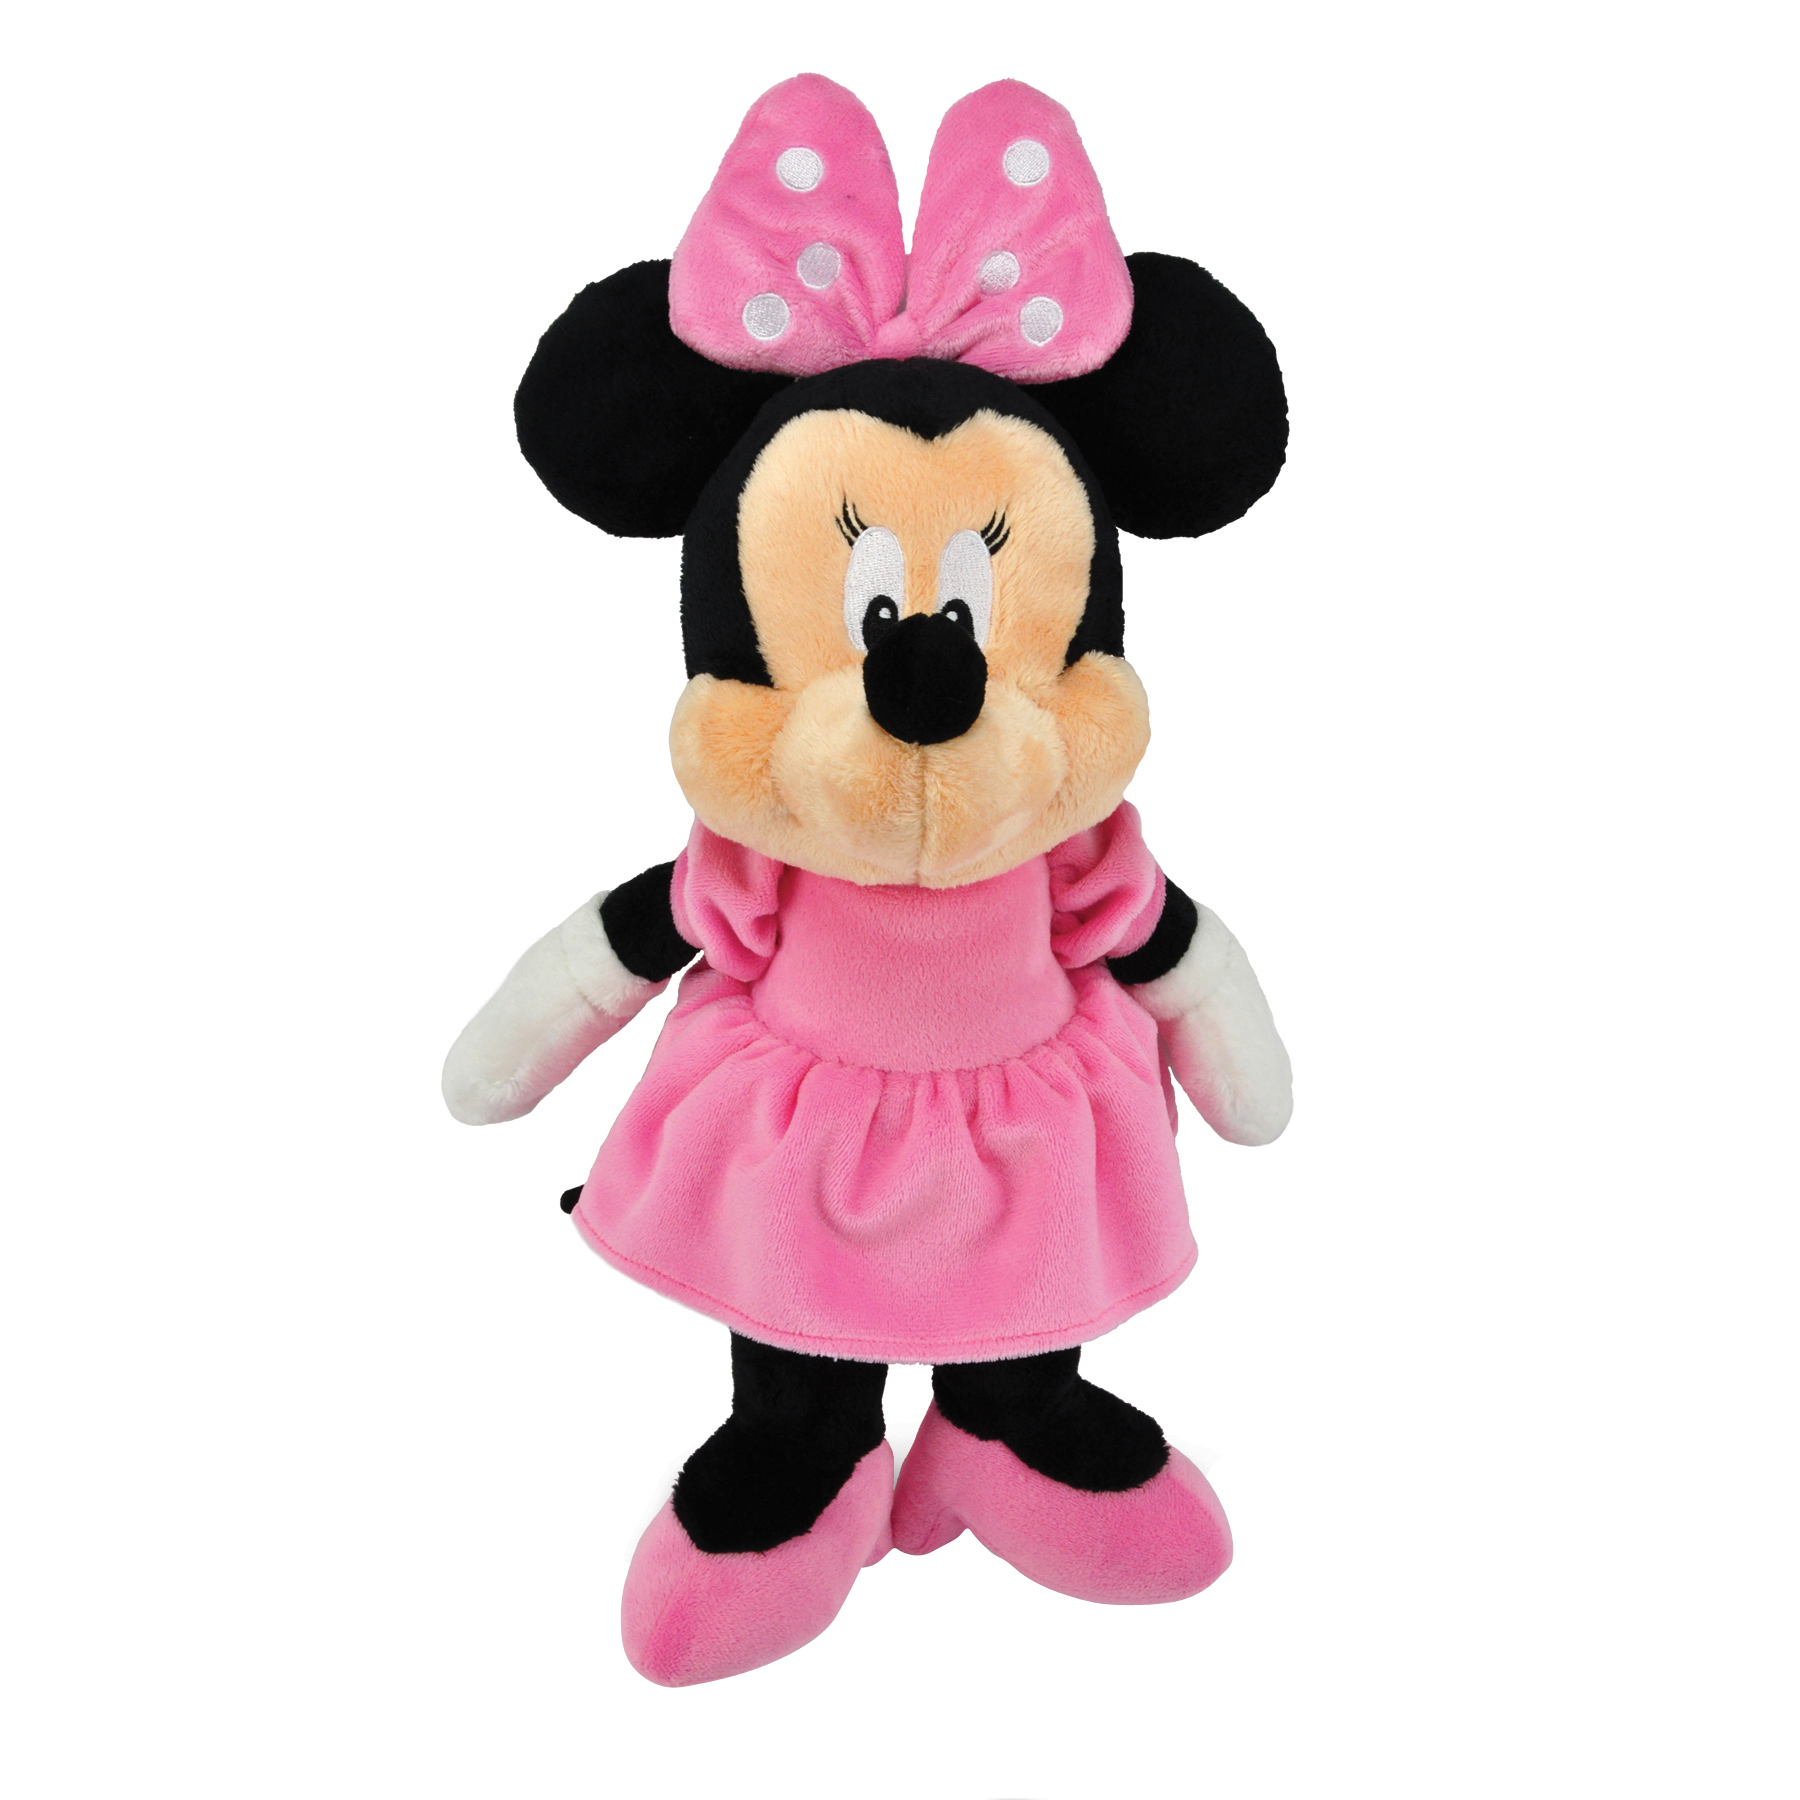 Mickey Mouse 12" Plush Minnie Mouse